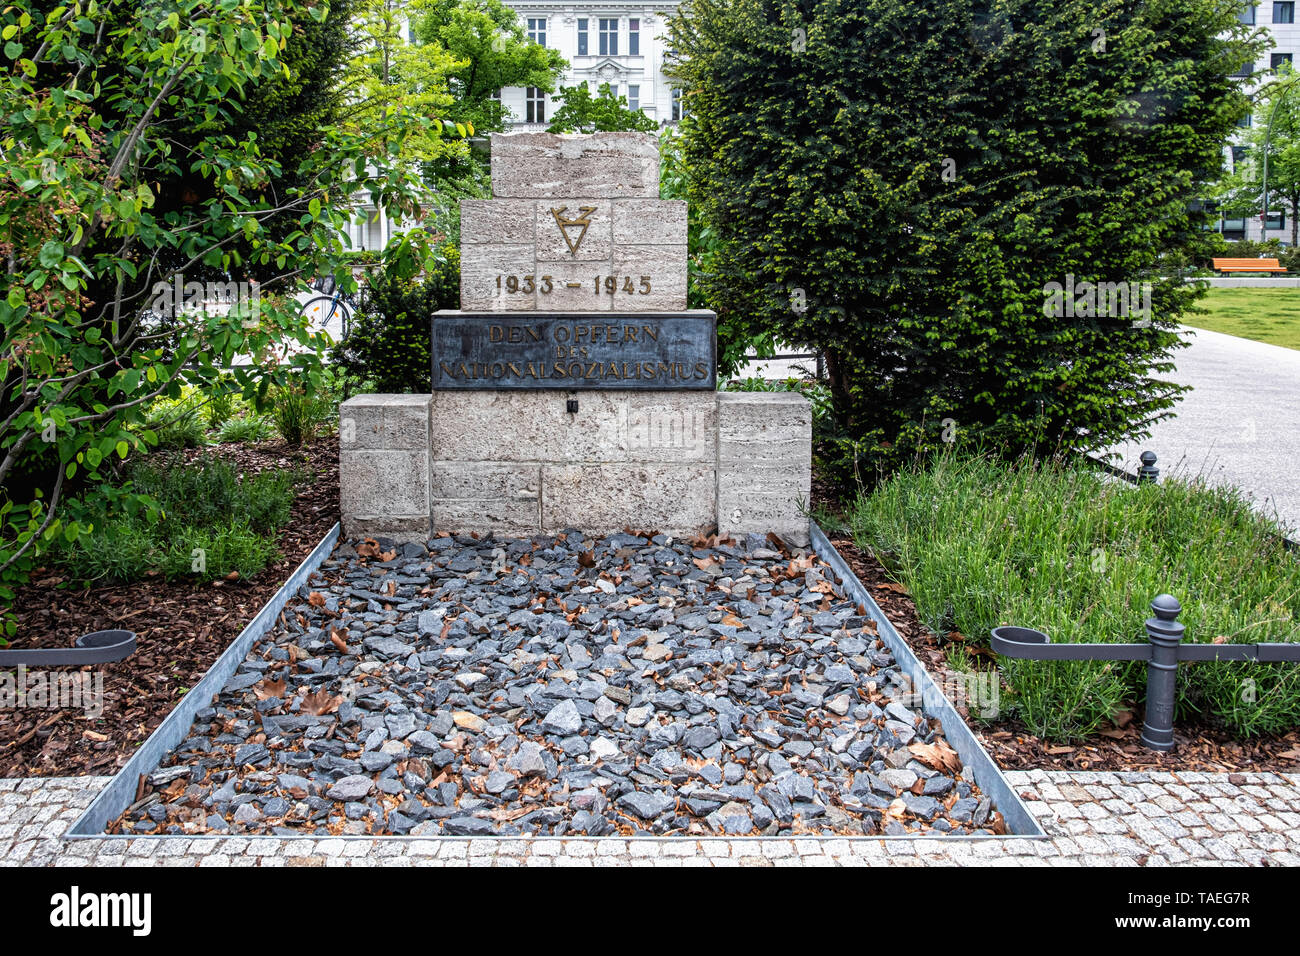 Memorial for the Victims of National Socialism during the Nazi Regime 1933-1945 on Steinplatz, Charlottenburg, Berlin.                                 Stock Photo